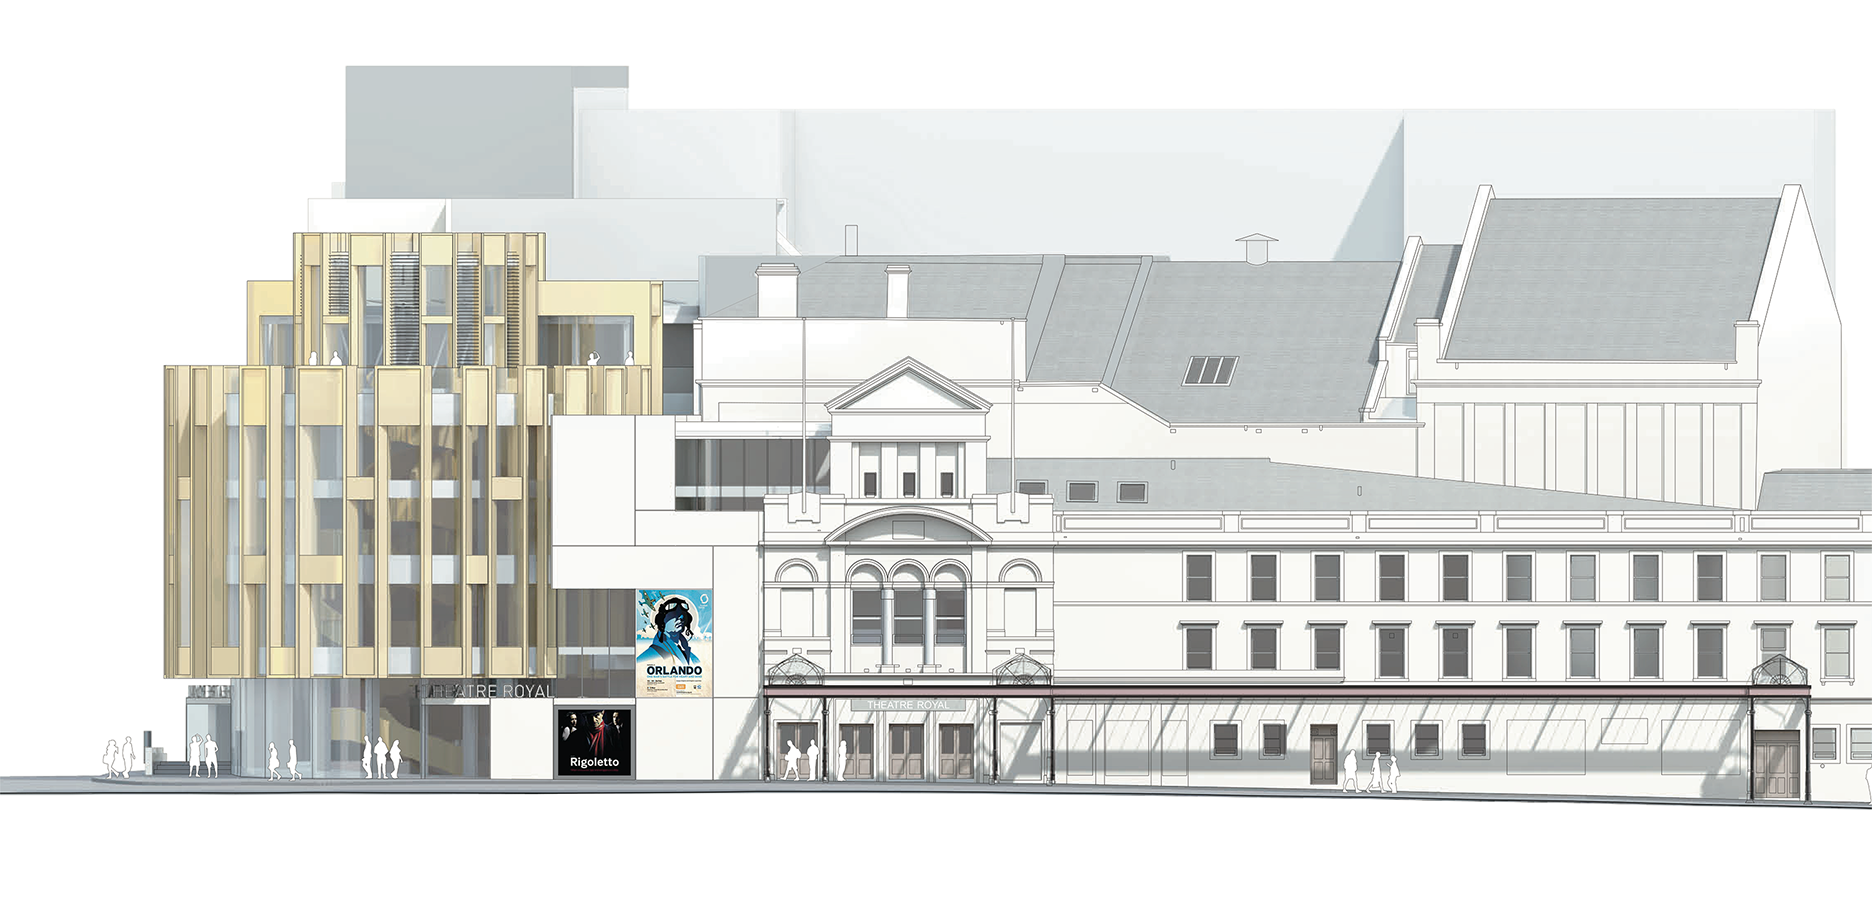 Architect's drawing of Theatre Royal Glasgow from Hope Street.